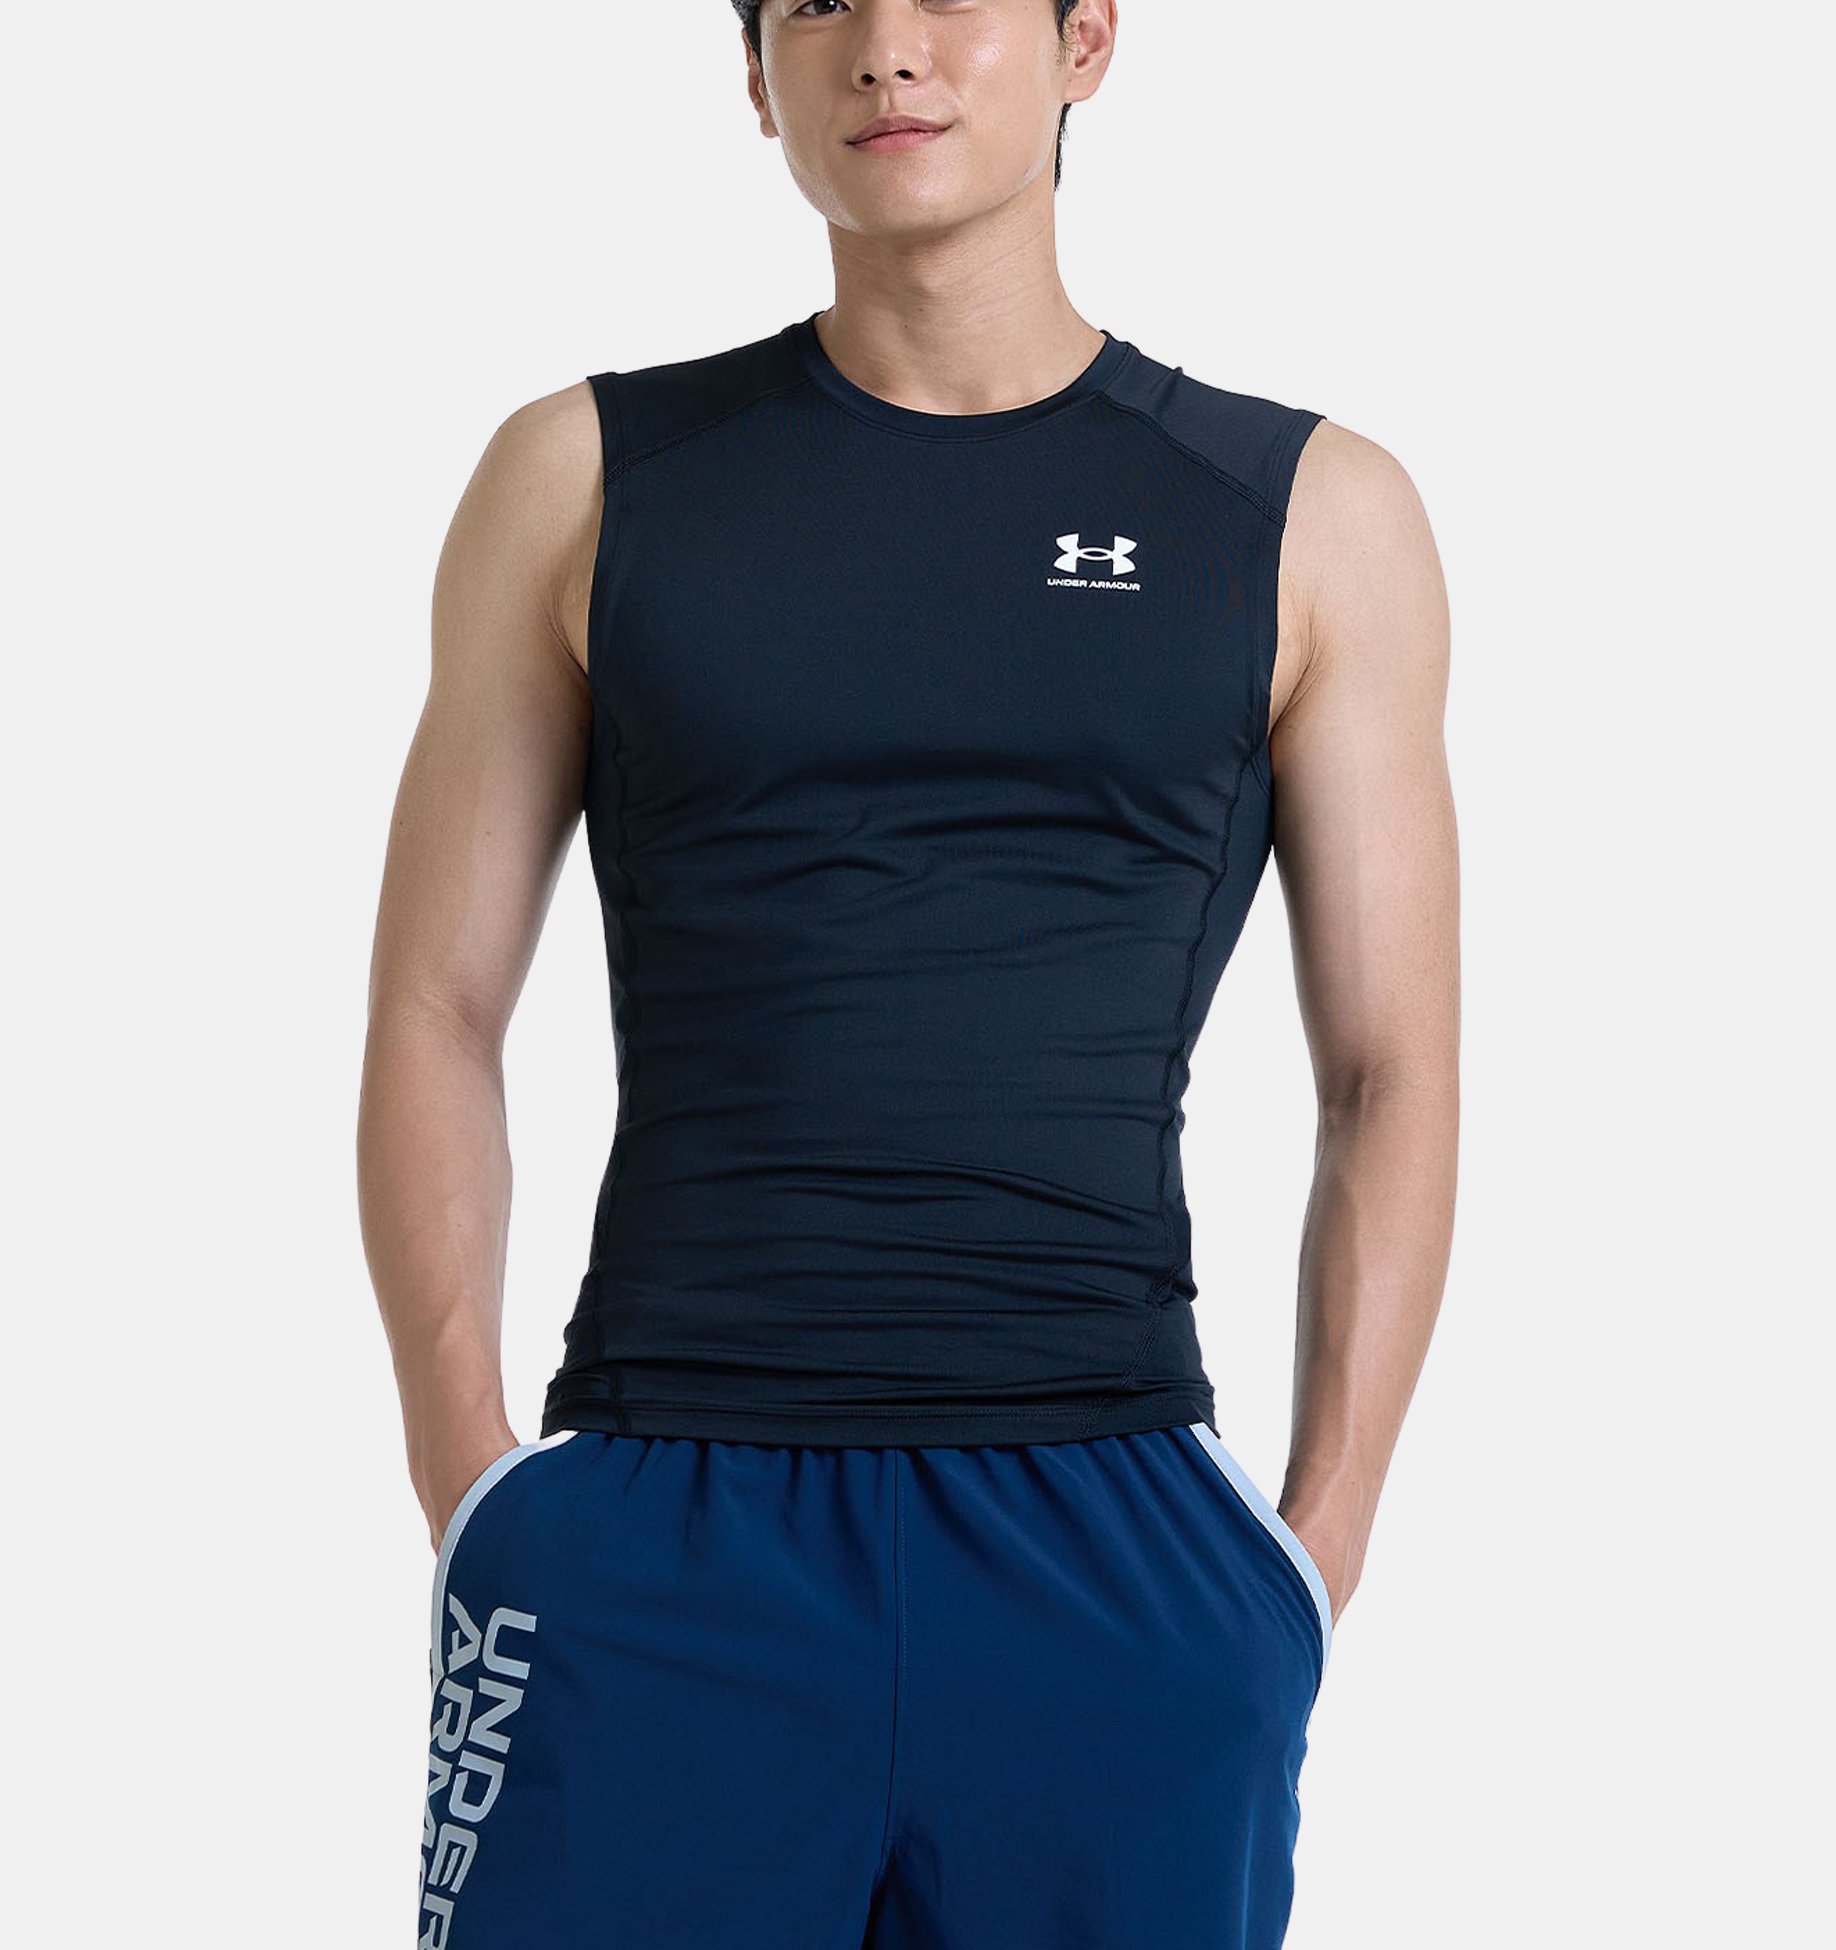 Under Armour Heatgear Sleeveless Compression Muscle Tee Royal 1257469-400 -  Free Shipping at LASC